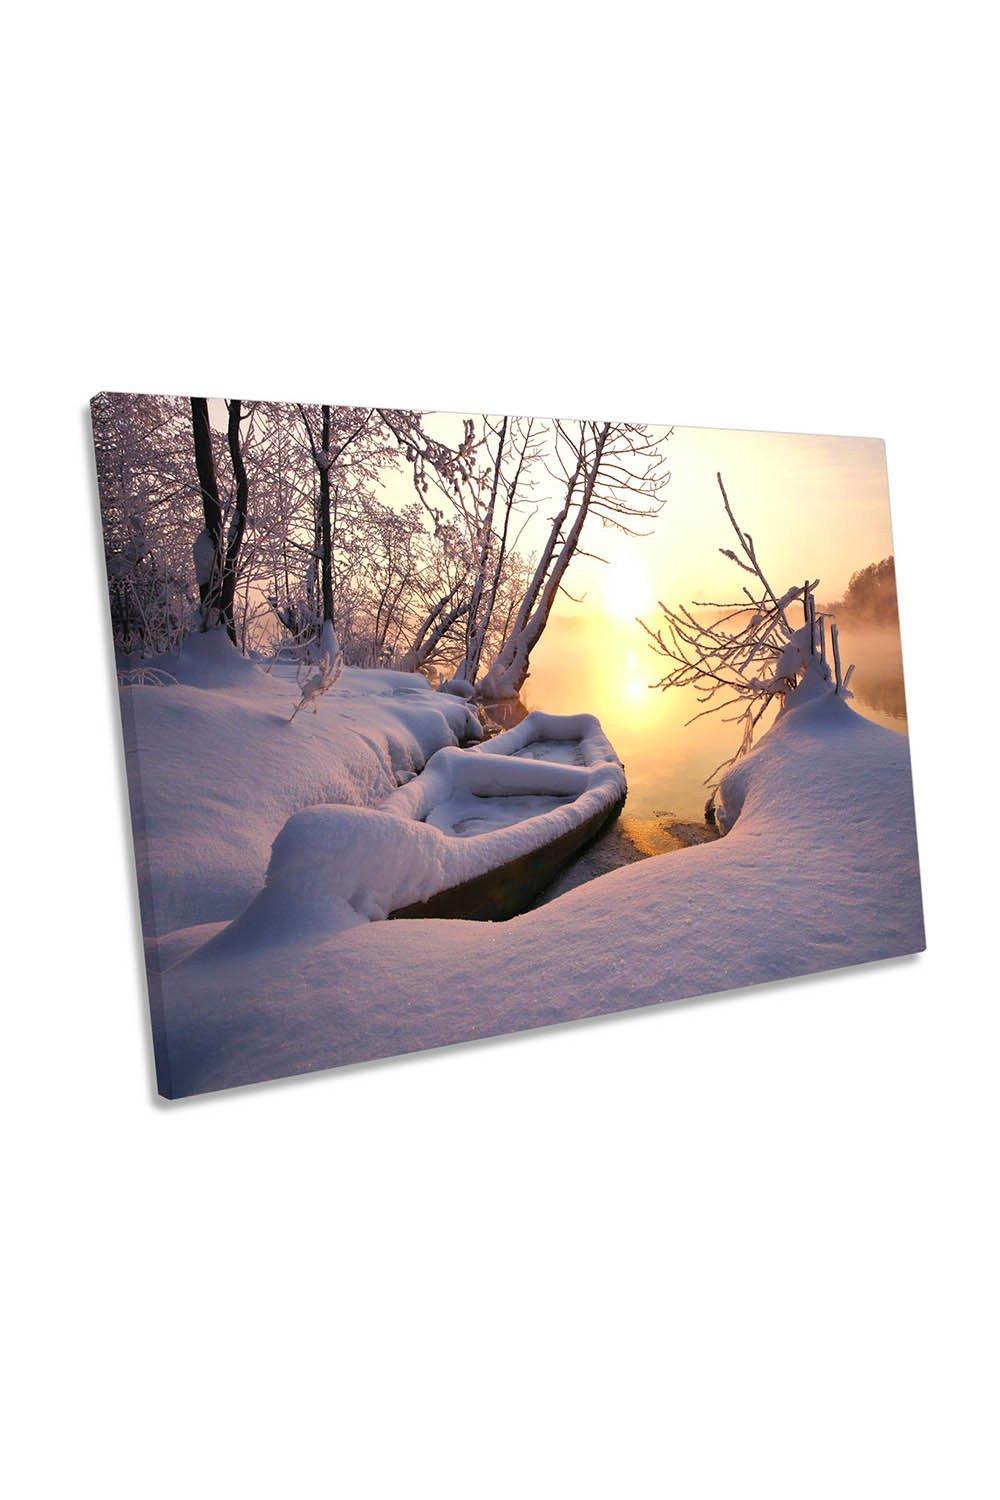 Shatura Morning Lake Snow Boat Sunset Canvas Wall Art Picture Print